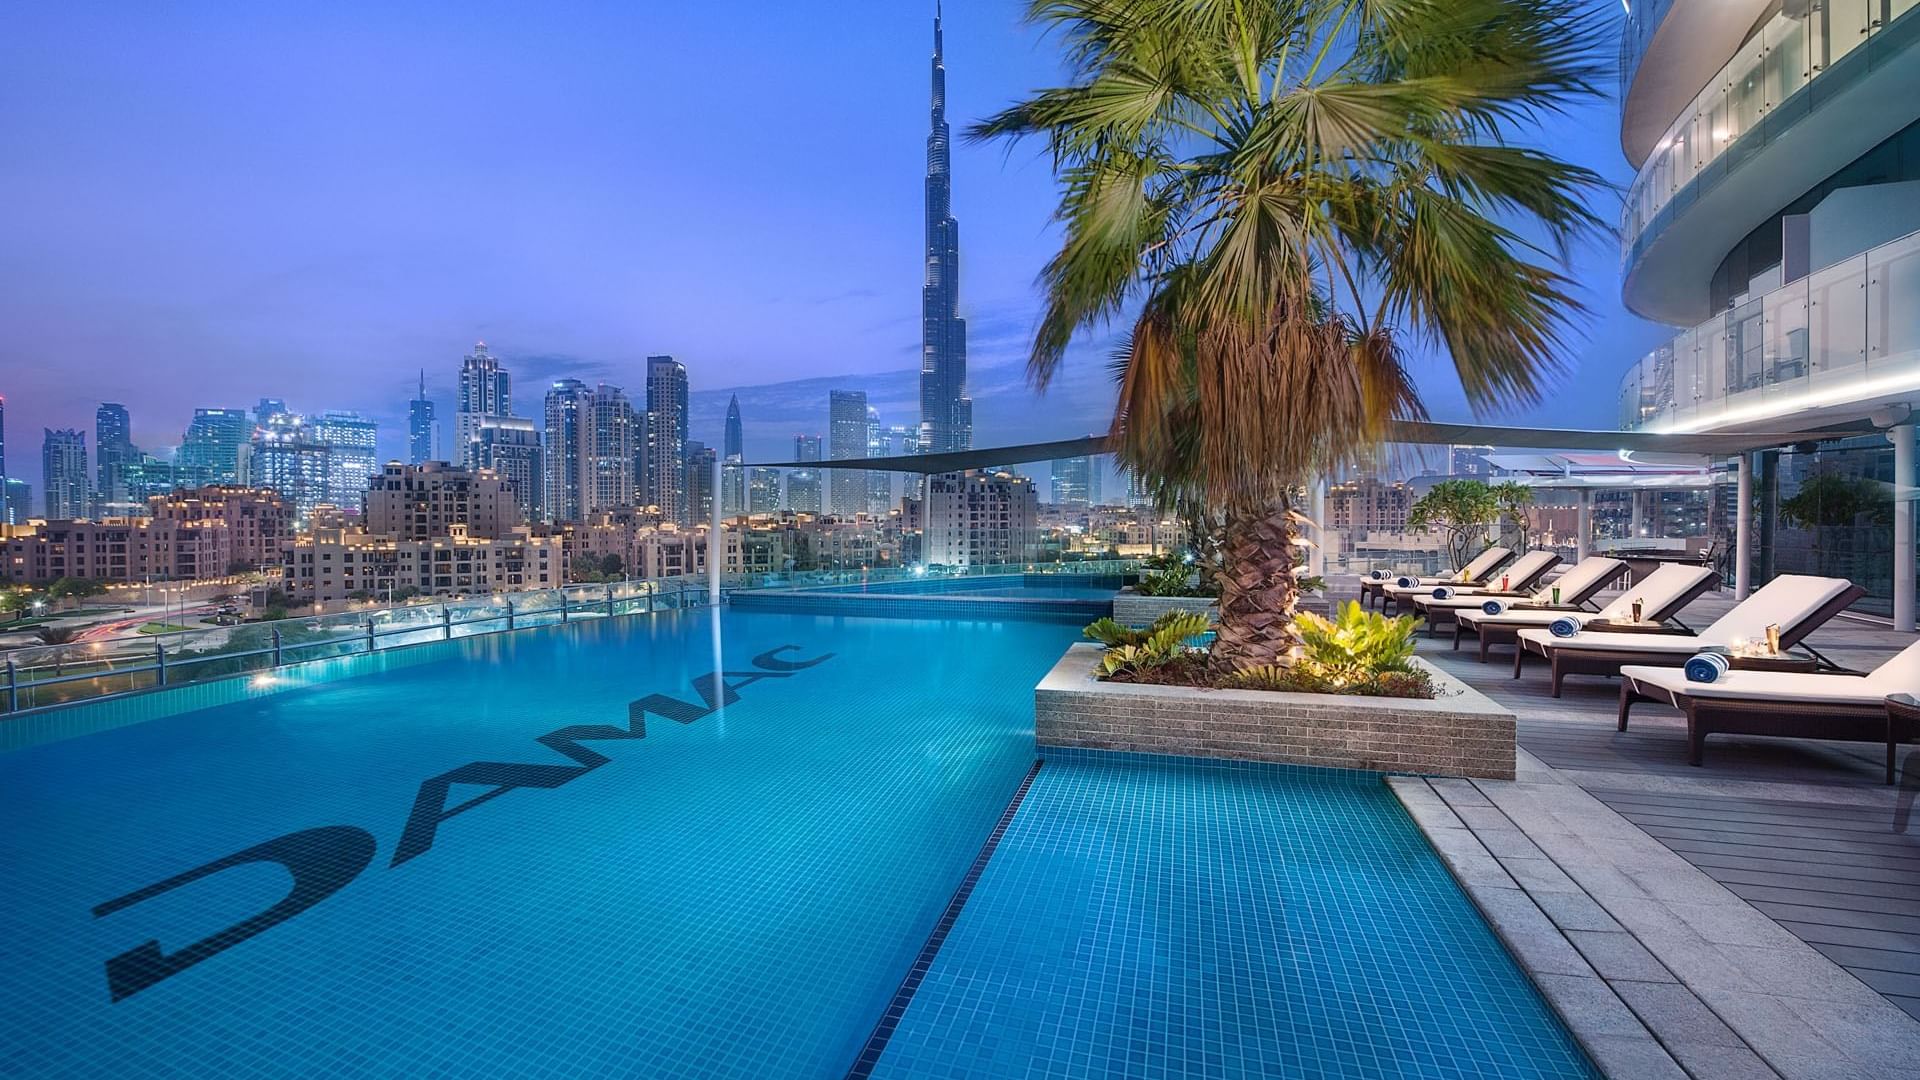 An outdoor pool on a terrace with sun loungers and the view of Burj khalifa from the DAMAC Maison Distinction